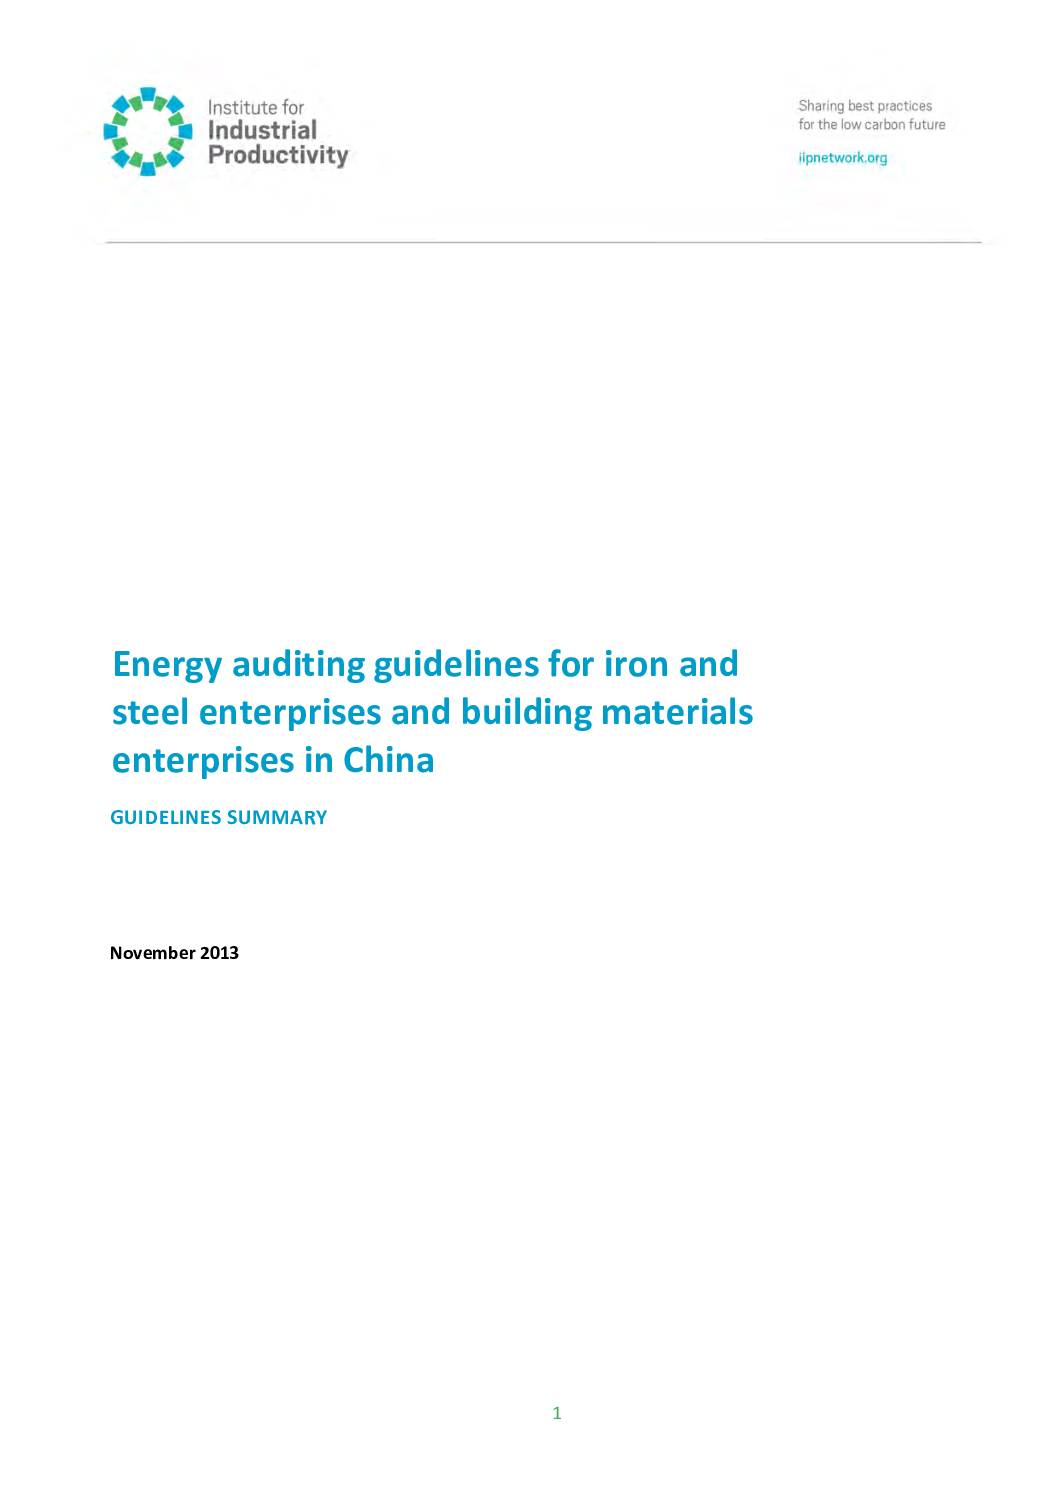 Energy auditing guidelines for iron and steel enterprises and building materials enterprises in China